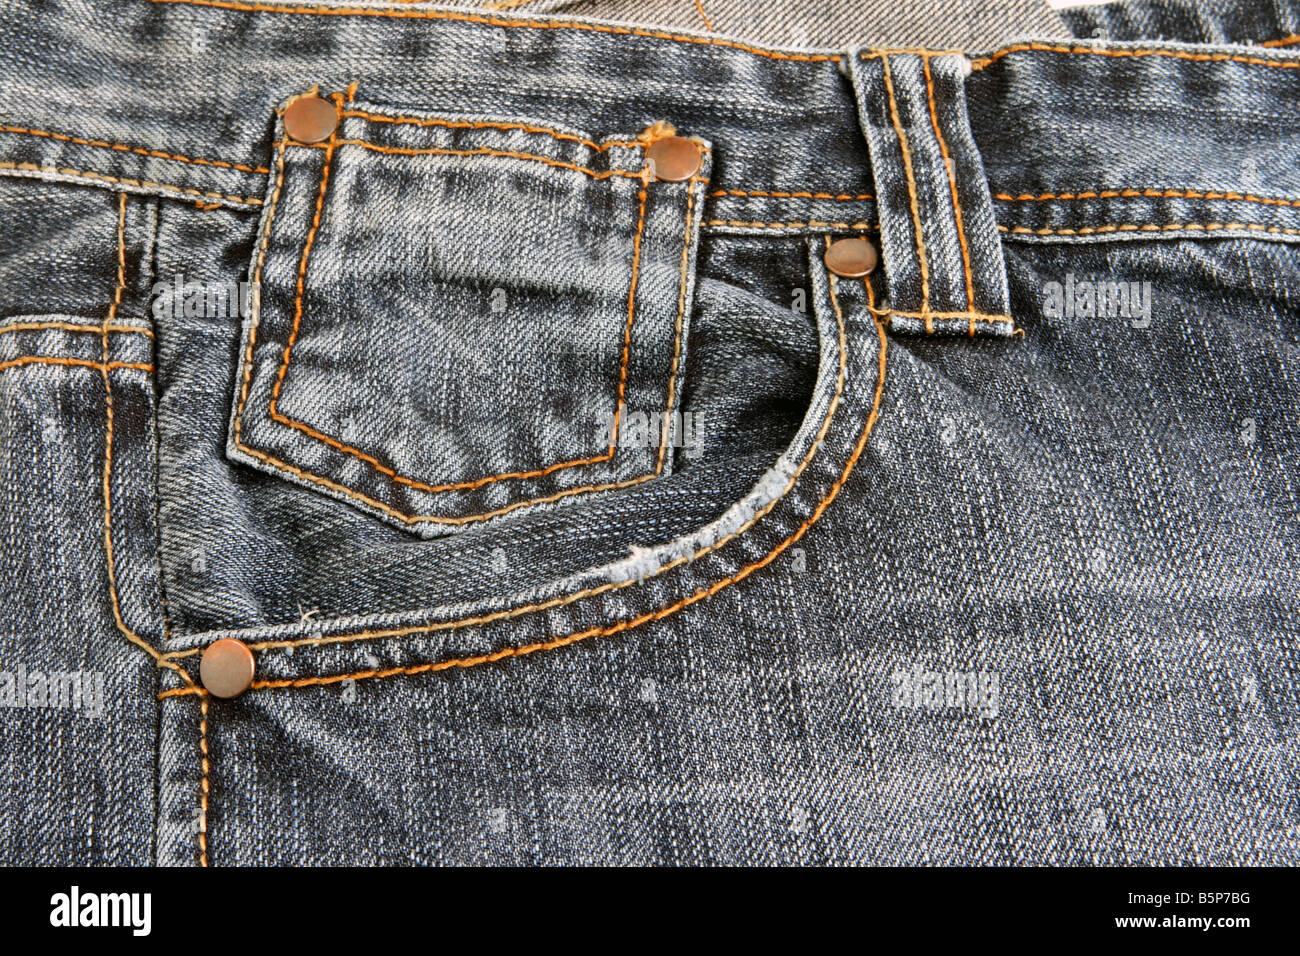 jeans detail Stock Photo